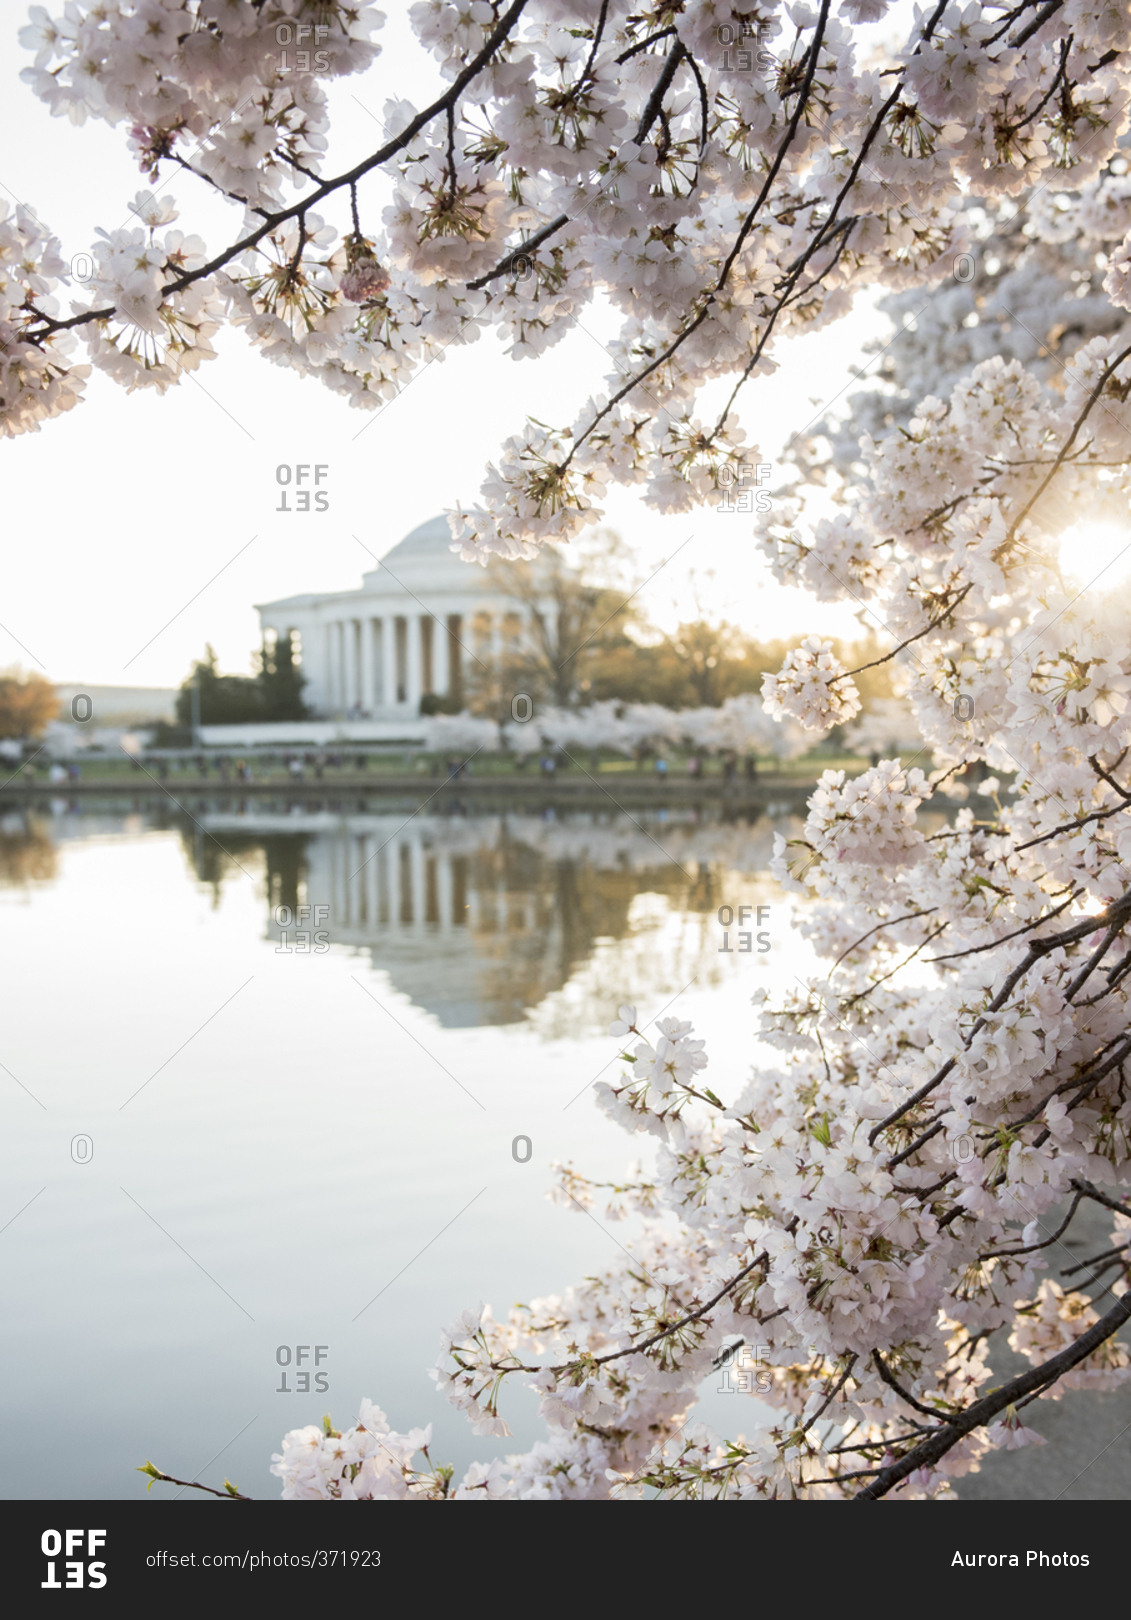 The Jefferson Memorial framed by cherry blossoms